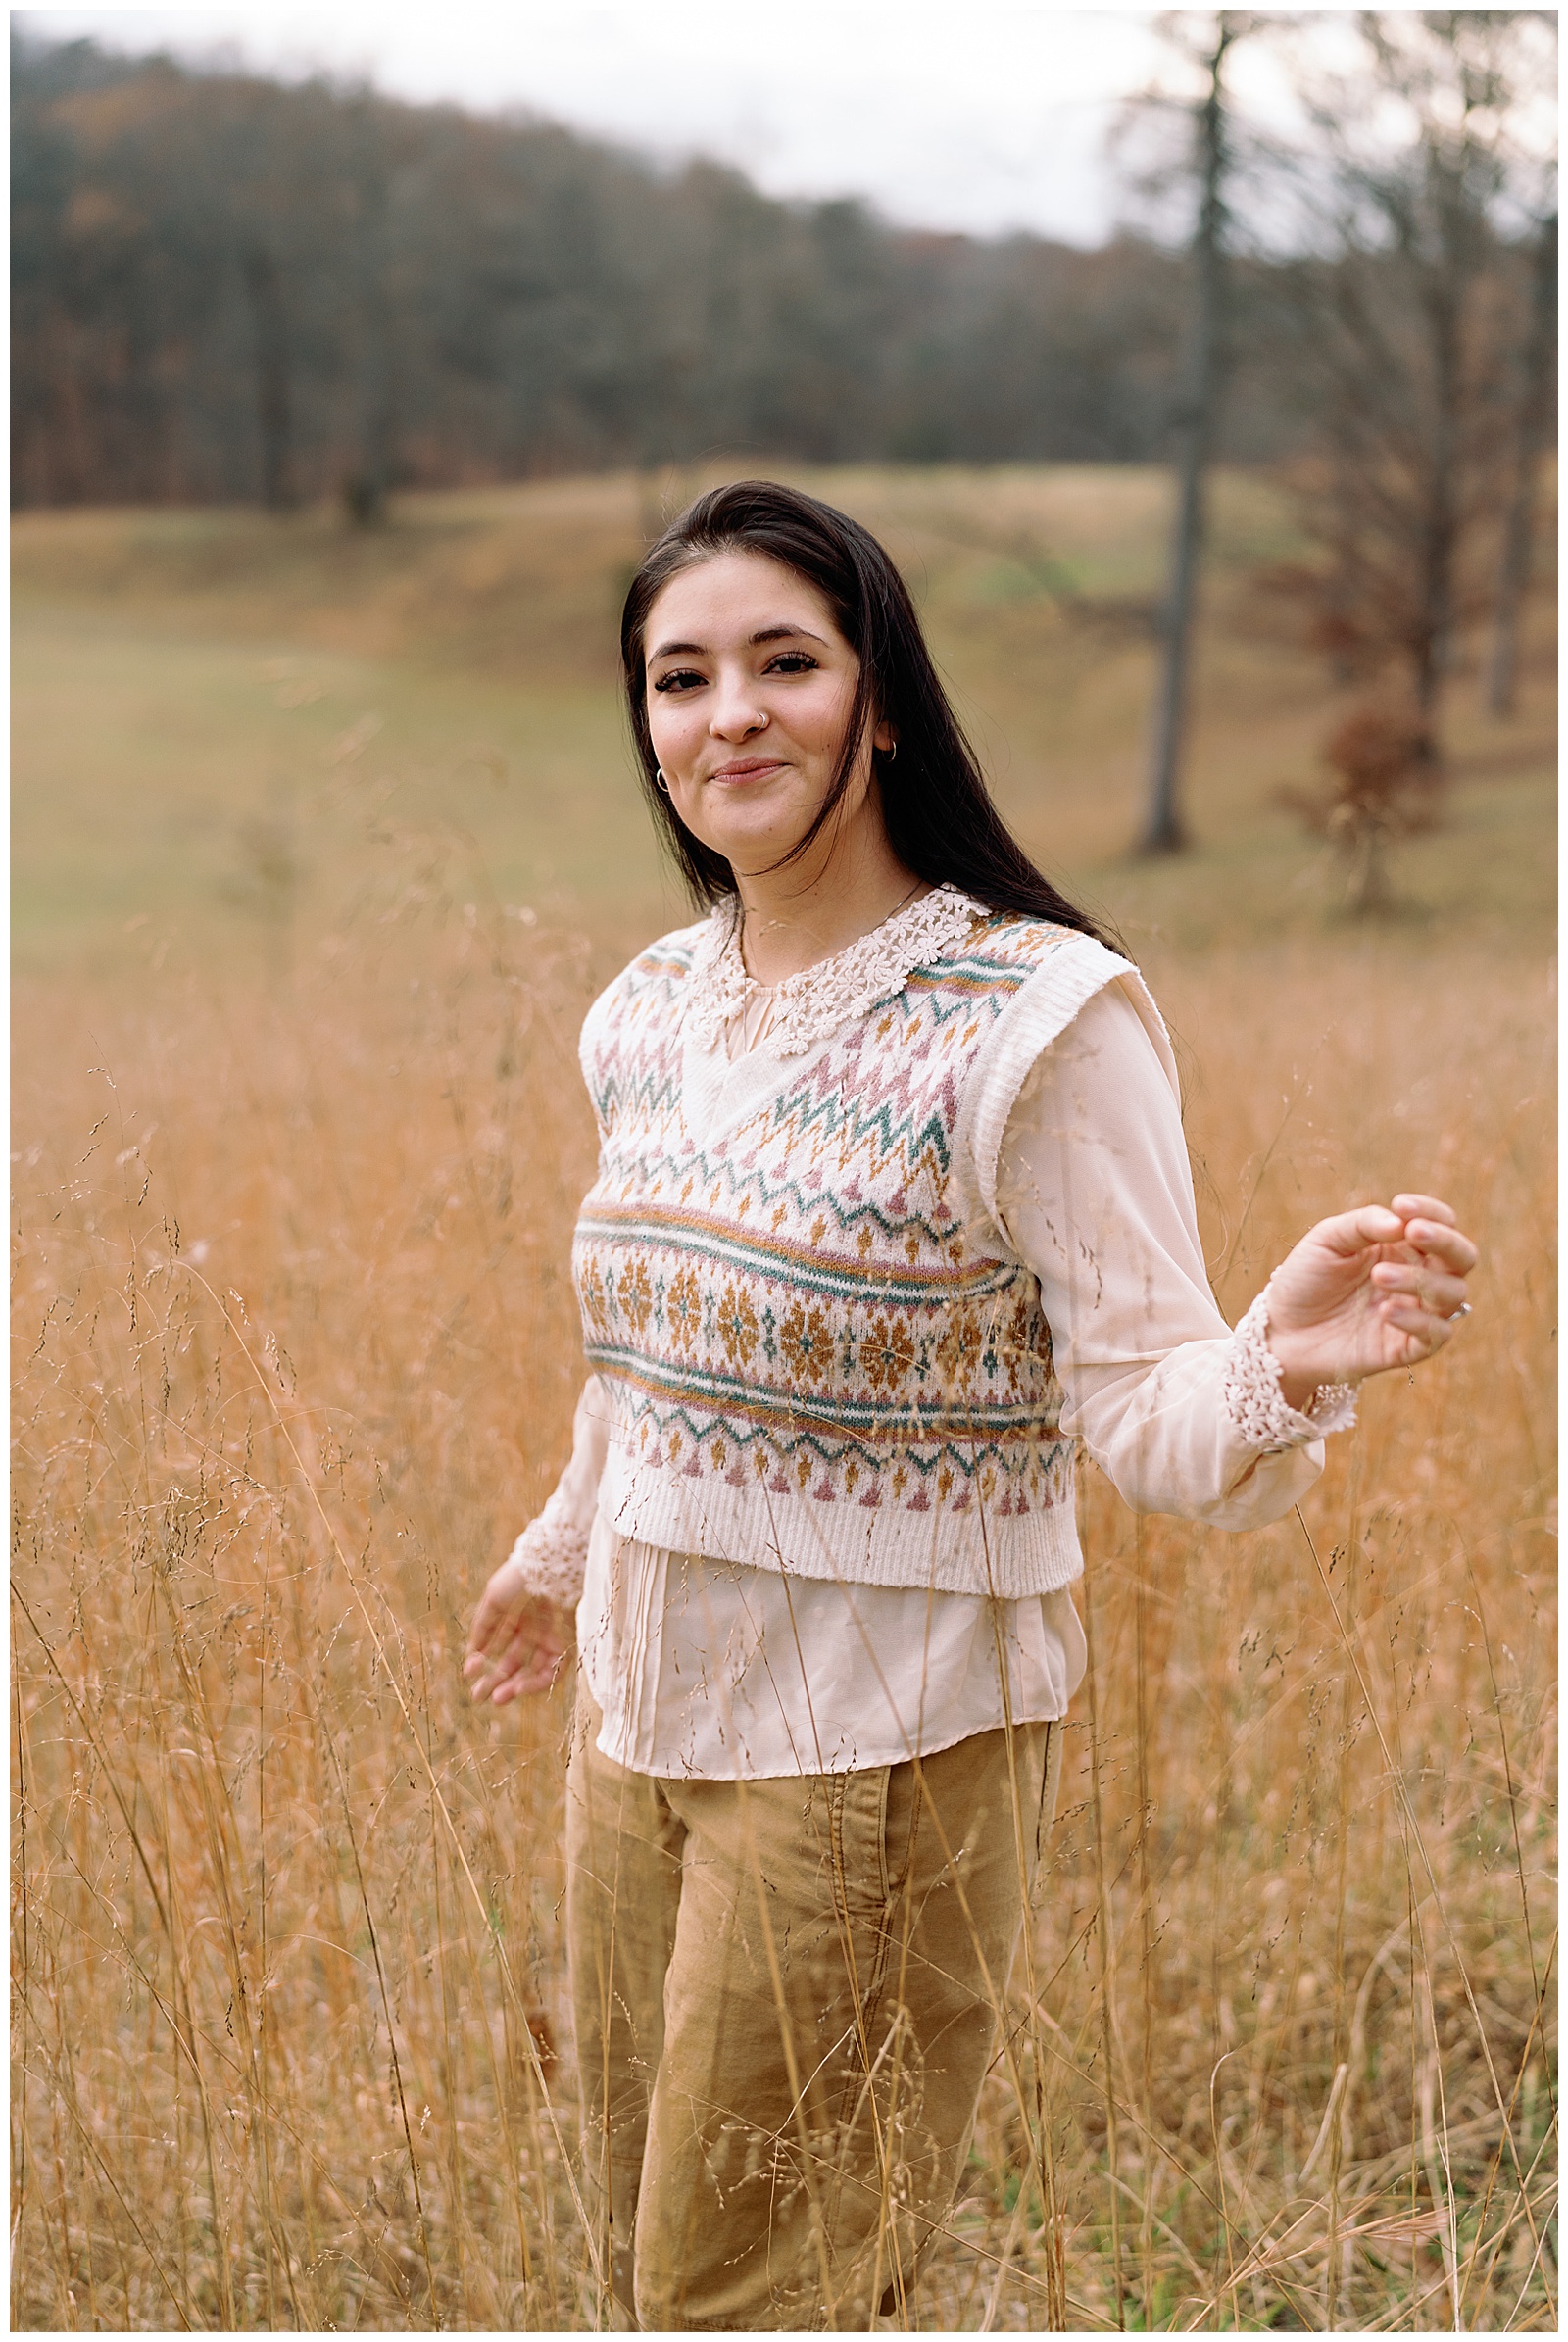 Beautiful woman in a meadow in the winter wearing a sweater vest and blouse